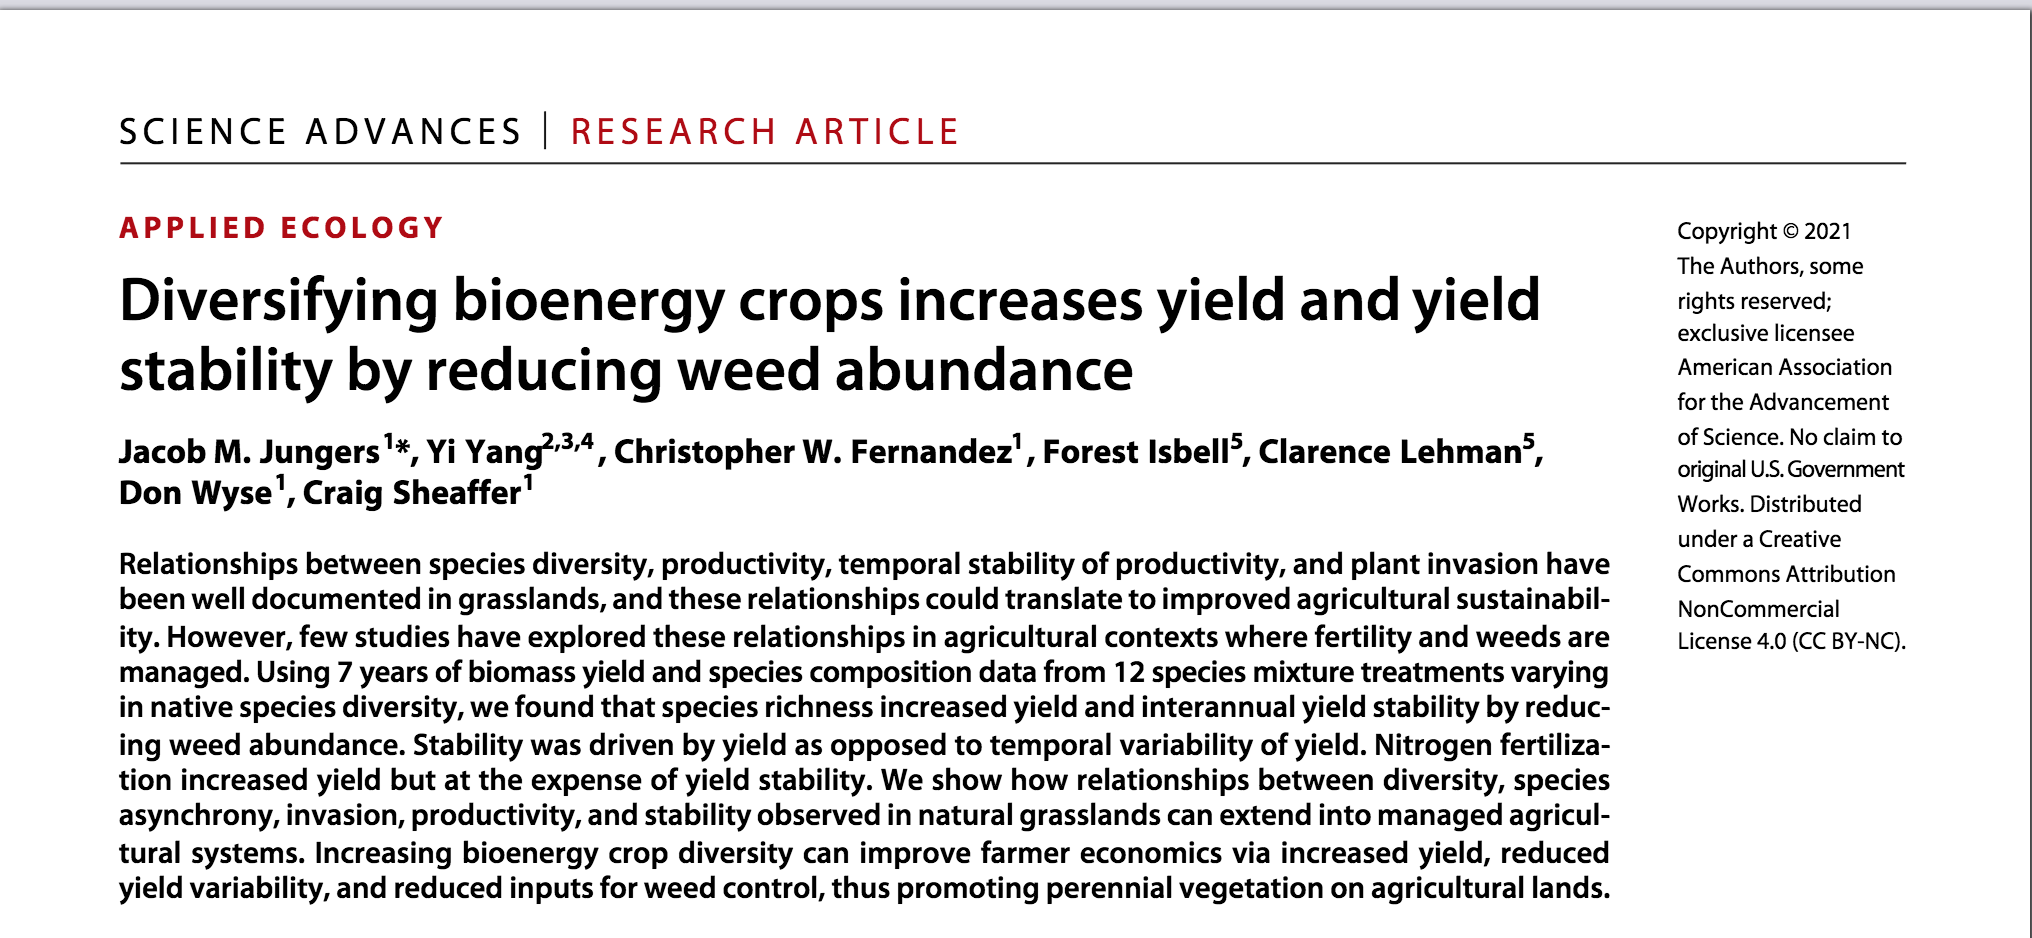 Species diversity affects weeds and yield stability